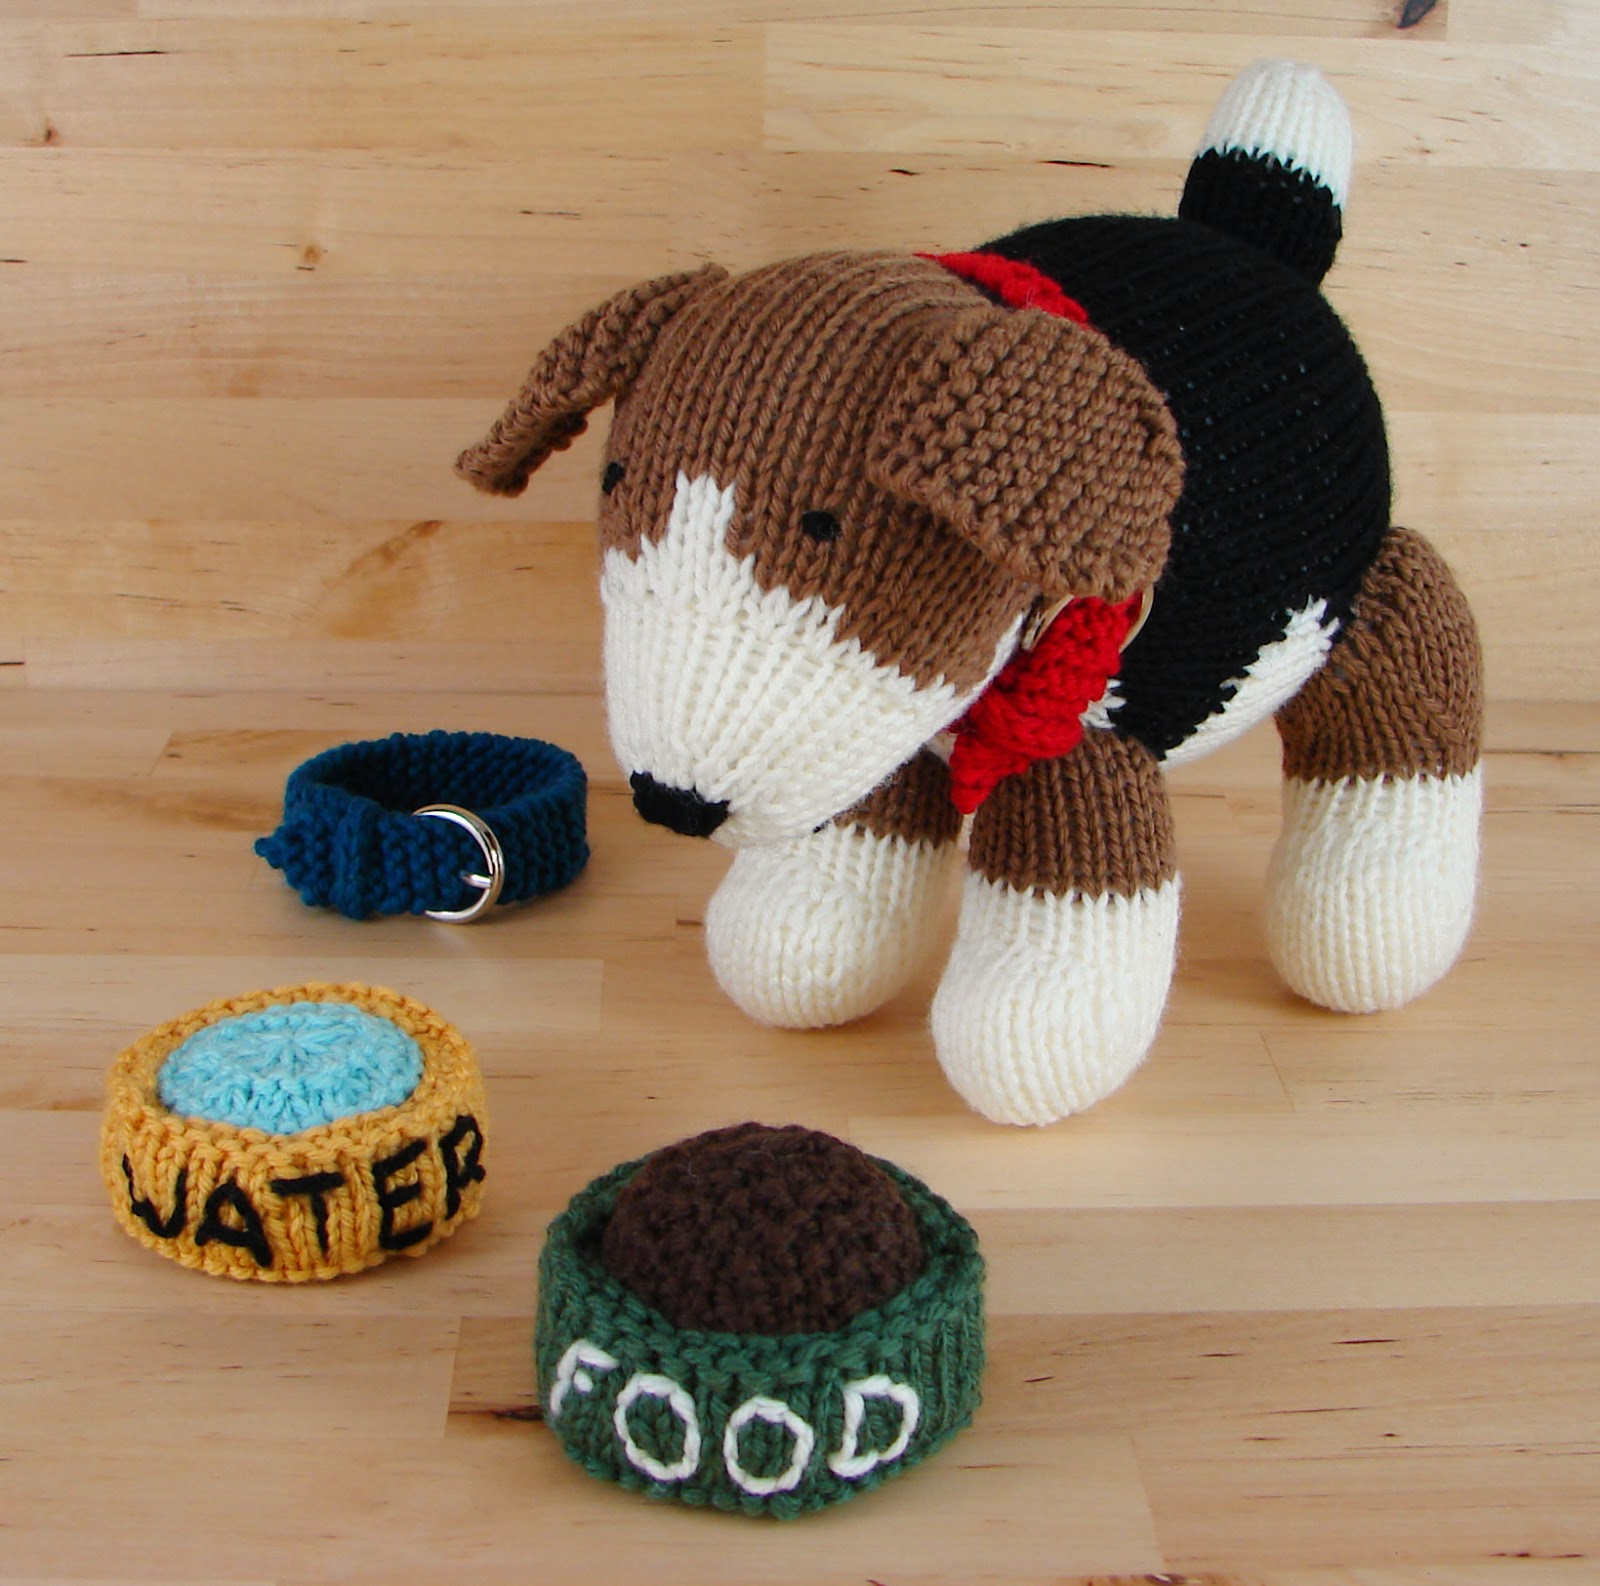 Auntie Em's Studio: Puppy Dog Playset Pattern now available!